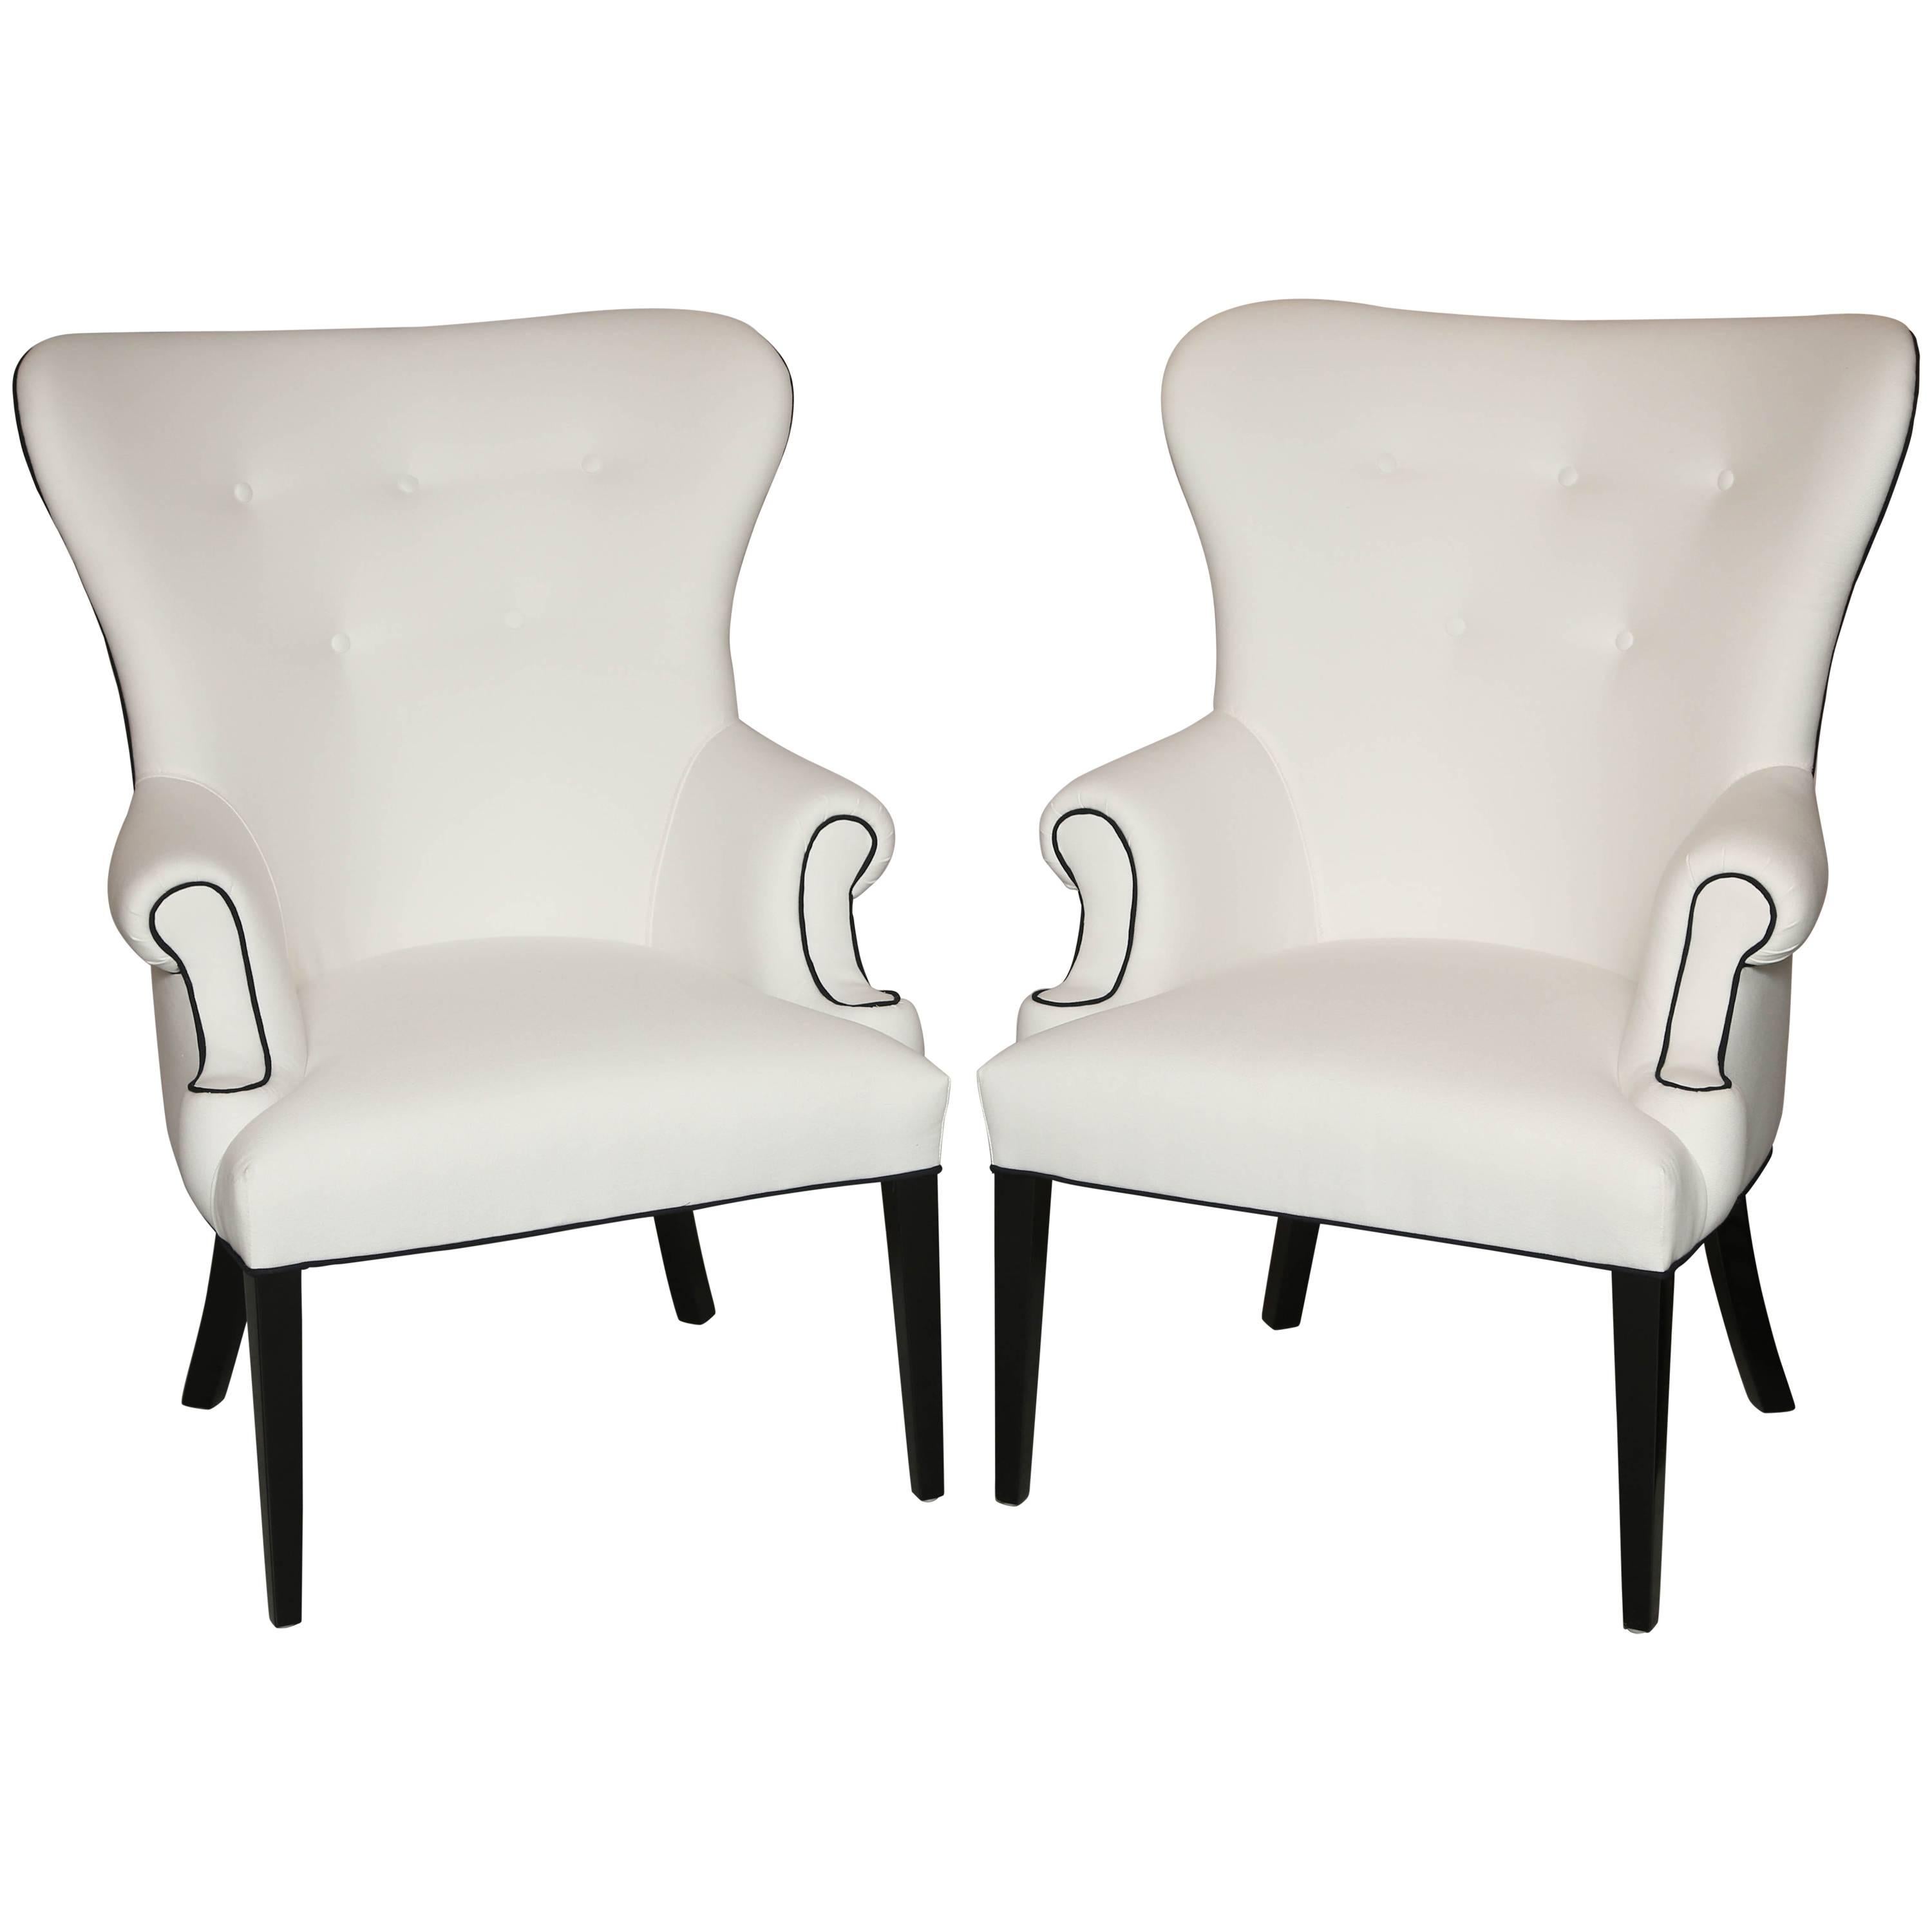 SALE SALE SALE  PR/HANDMADE  WHITE CHAIRS" designed by Susane R. WAS $1950.00 For Sale